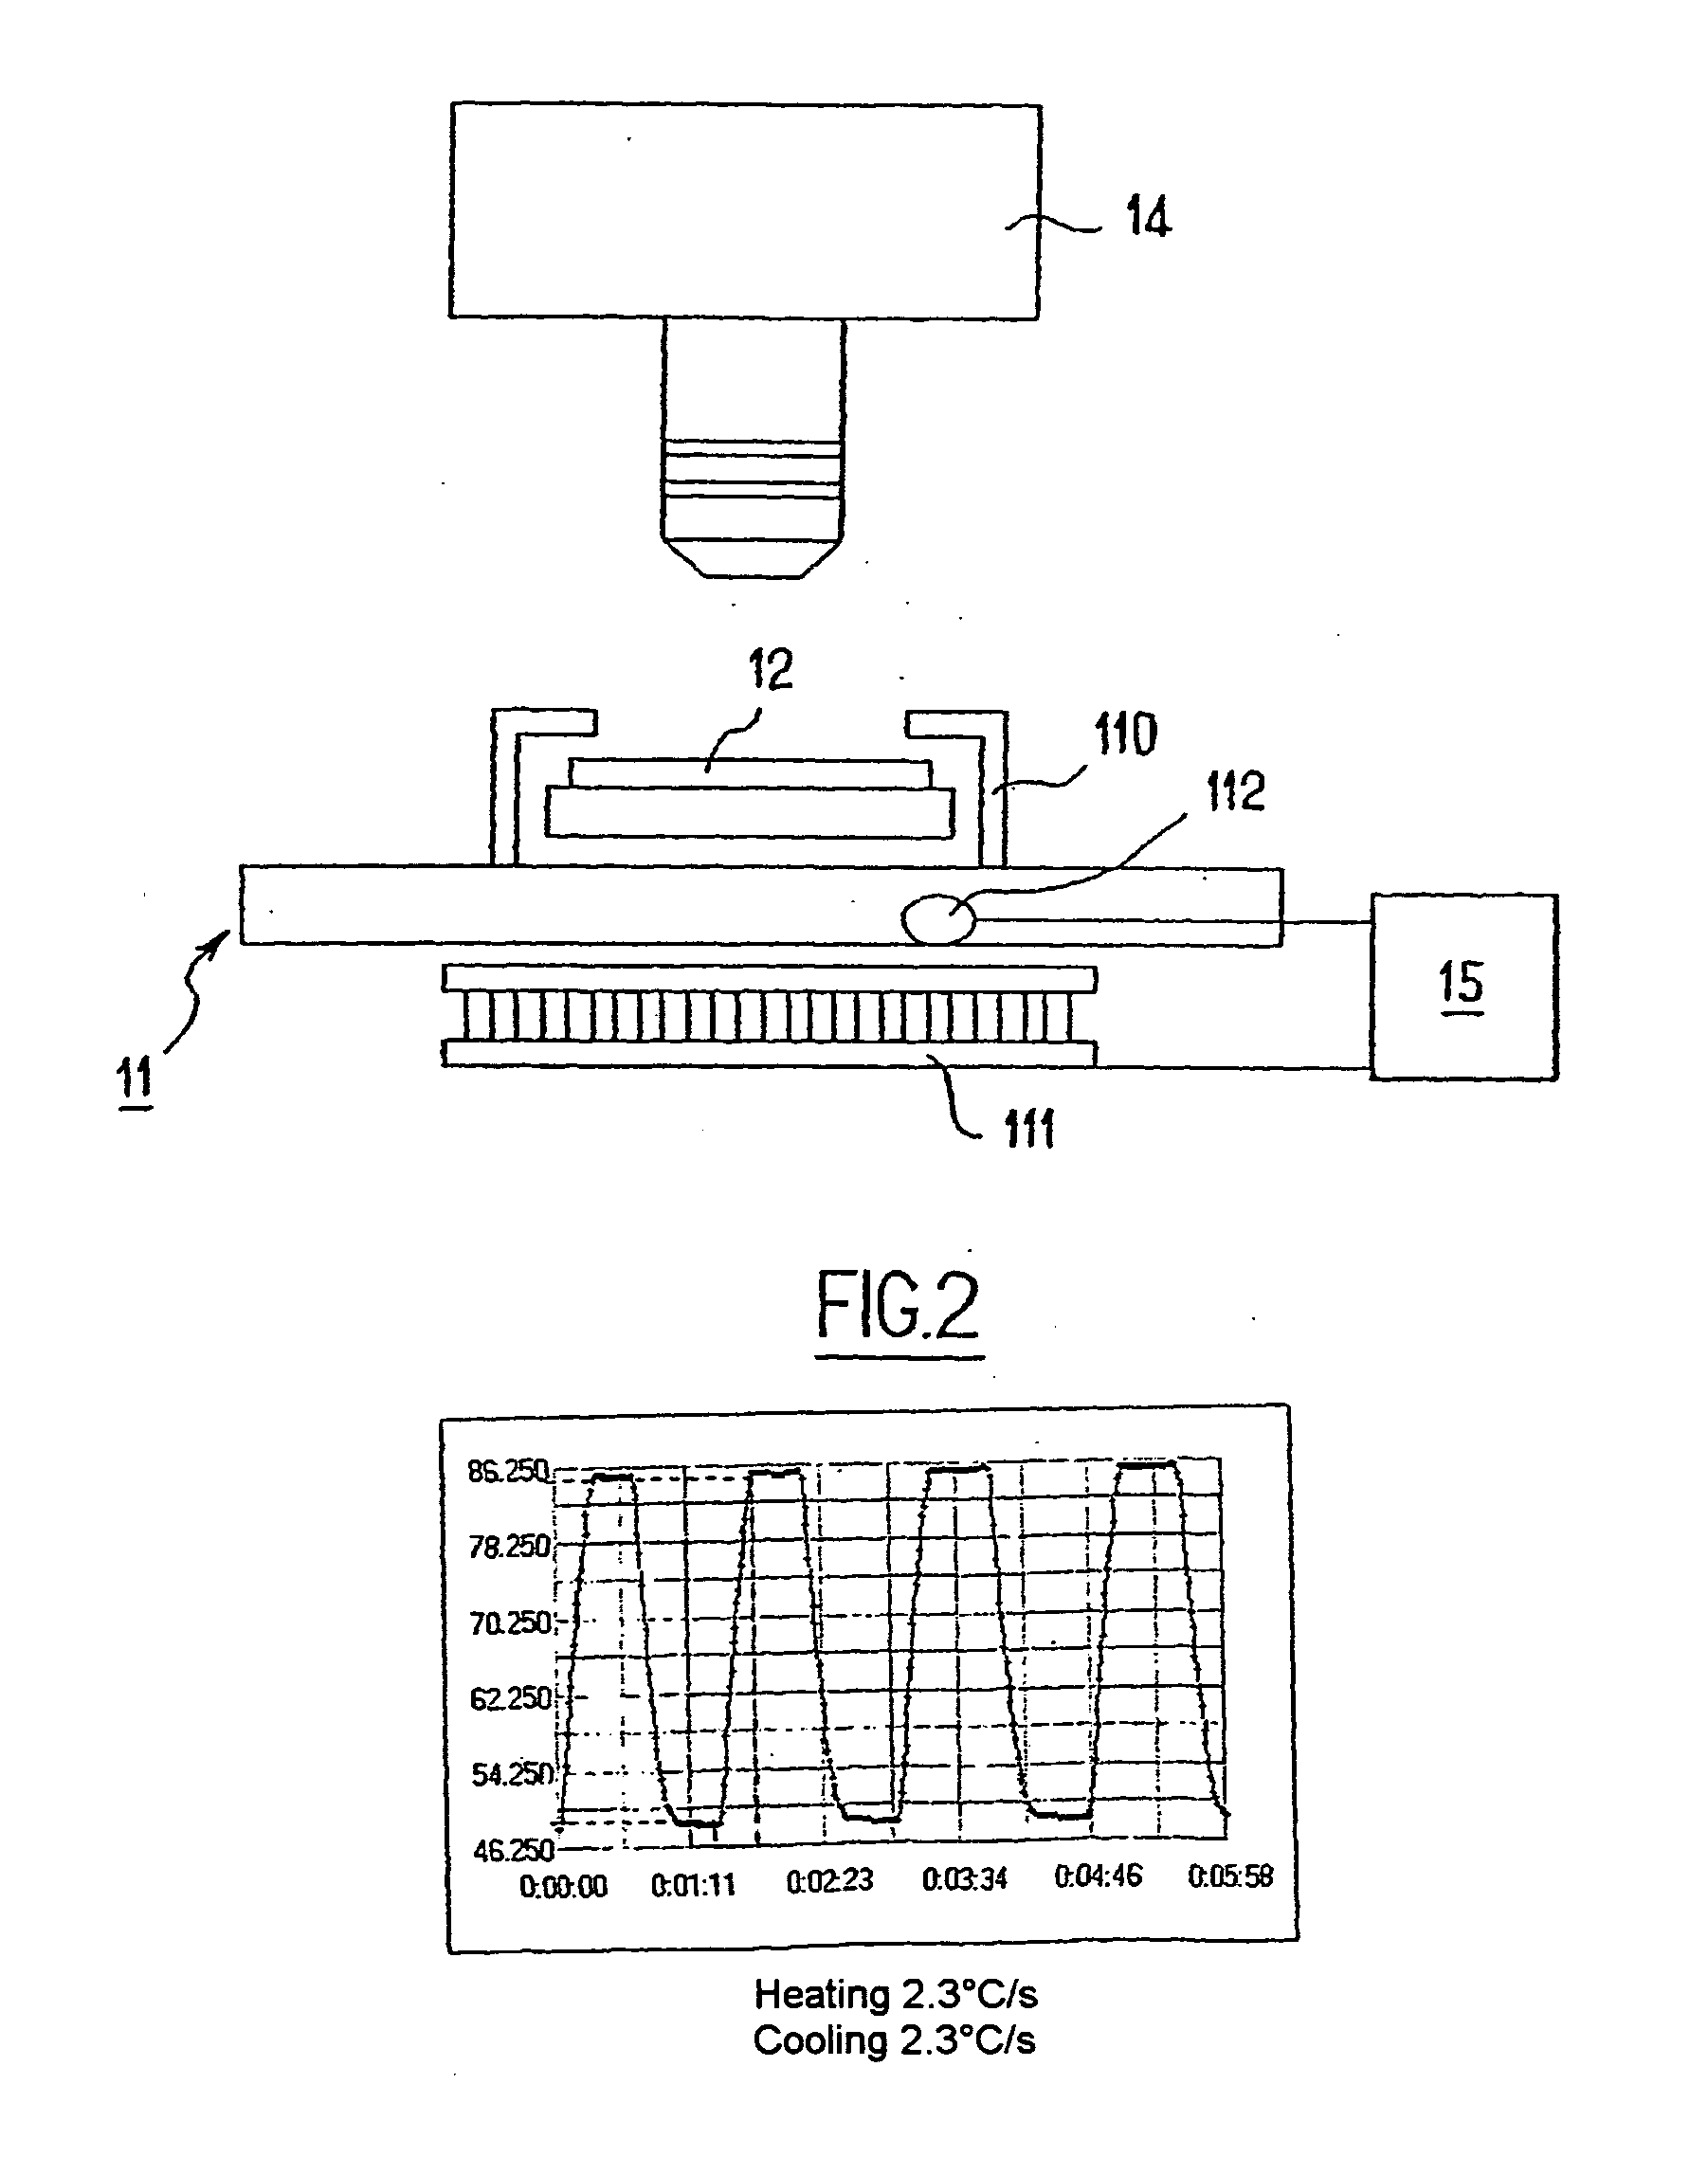 Chip reader for biochips and associated methods